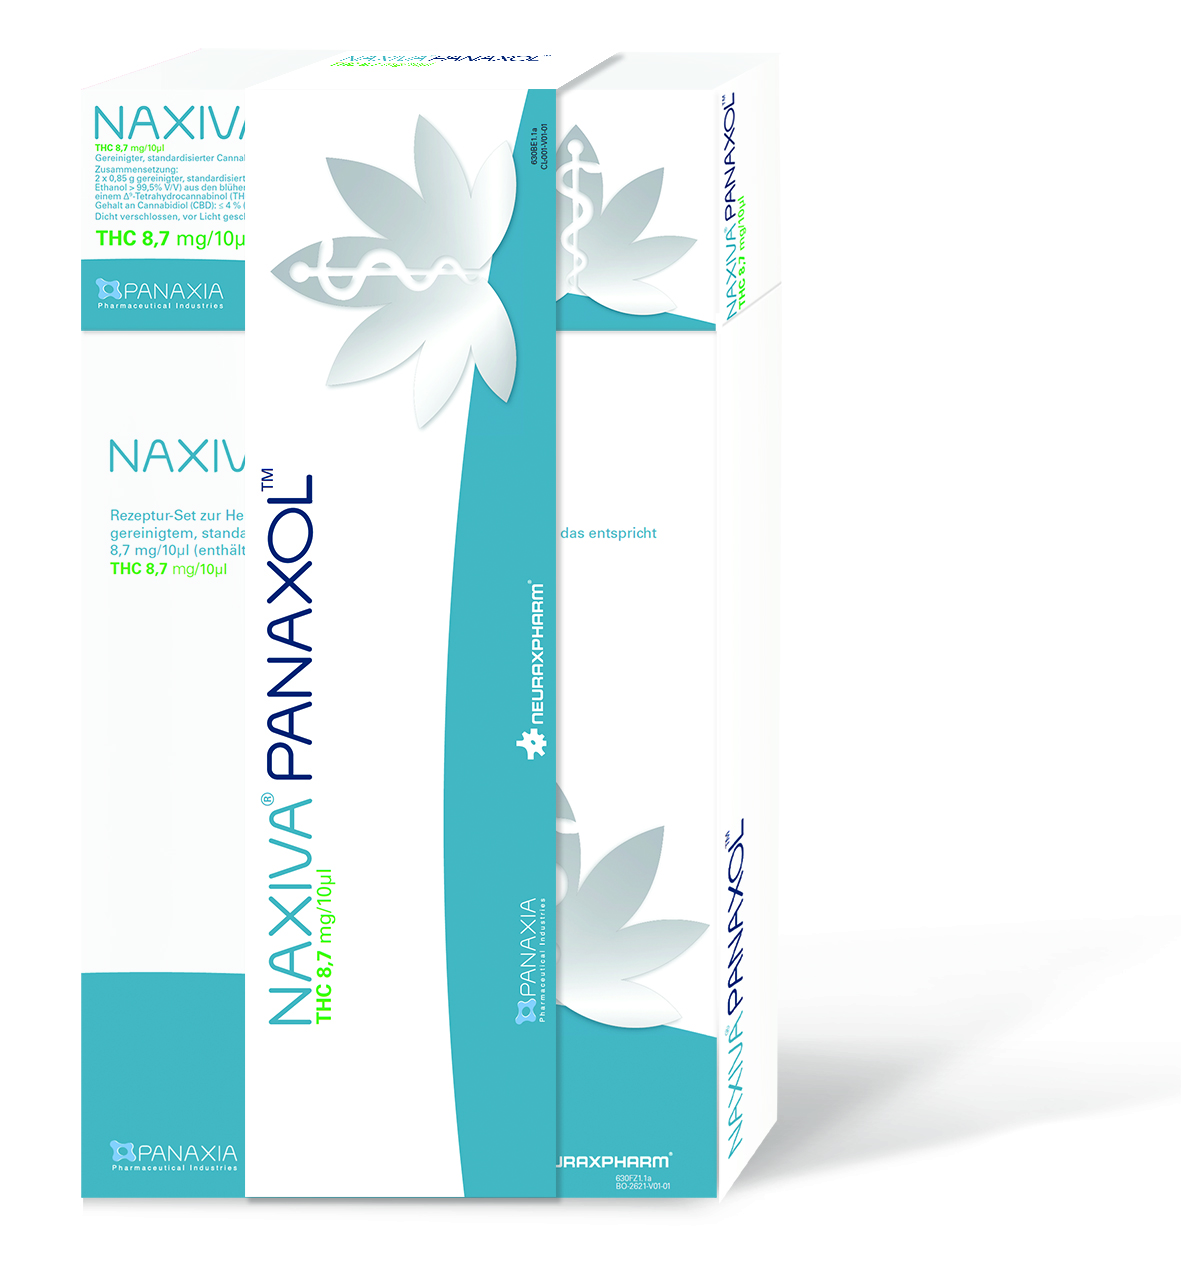 NAXIVA - PANAXOL Purified Medical Cannabis Extract for Inhalation